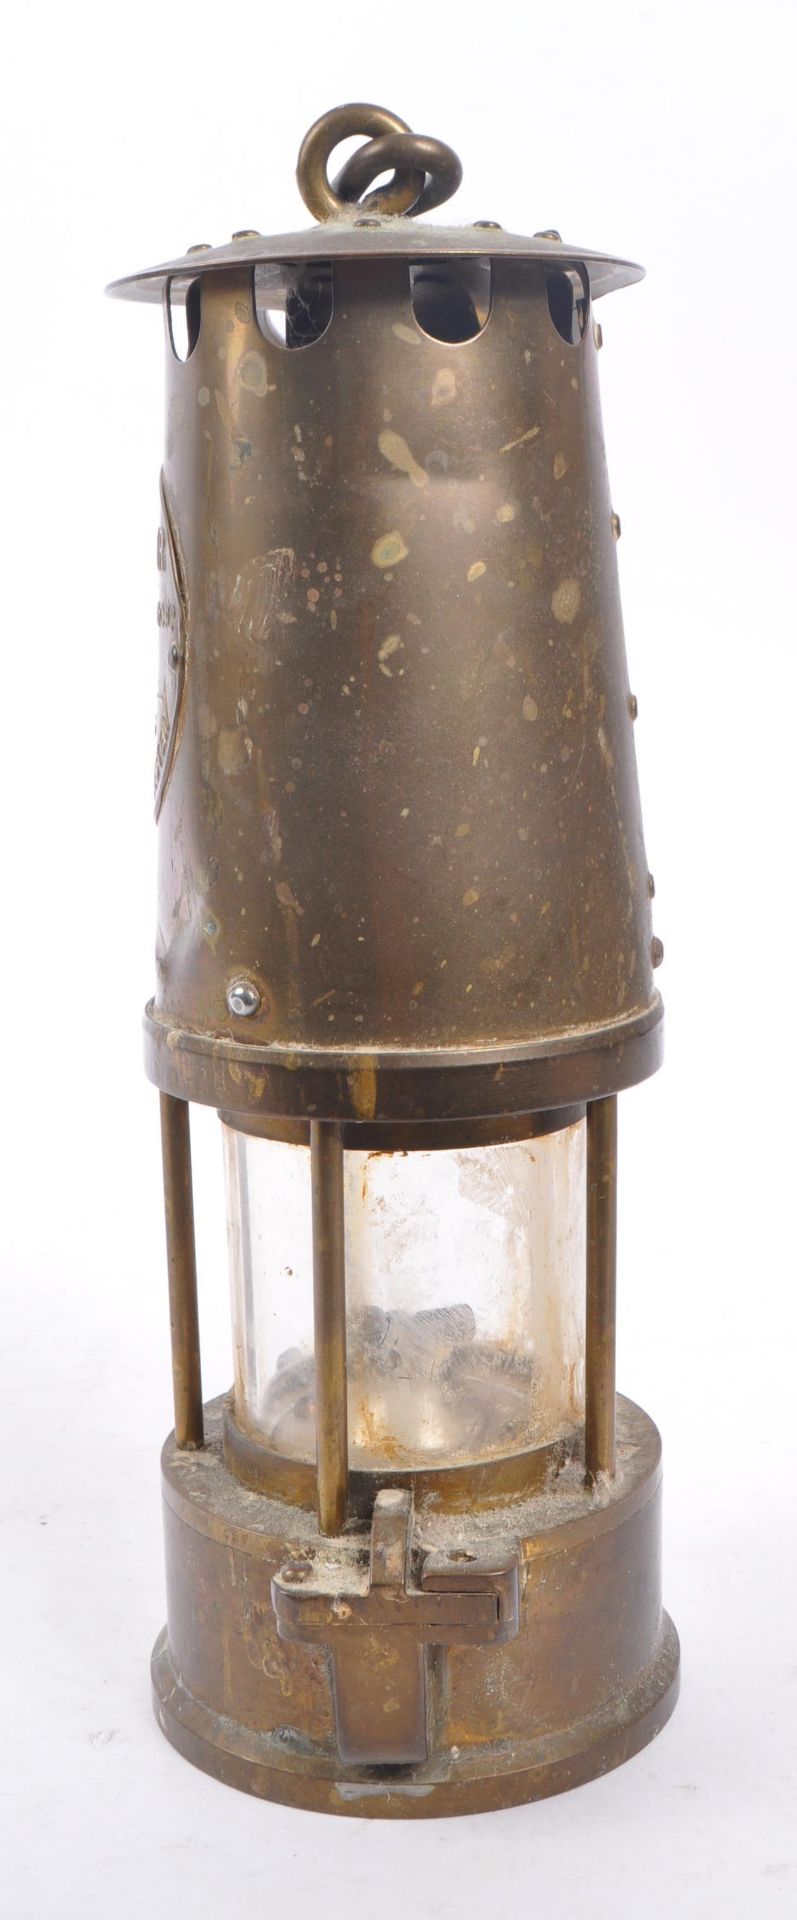 THE PROTECTOR LAMP & LIGHTING - BRASS MINERS LAMP - Image 2 of 6